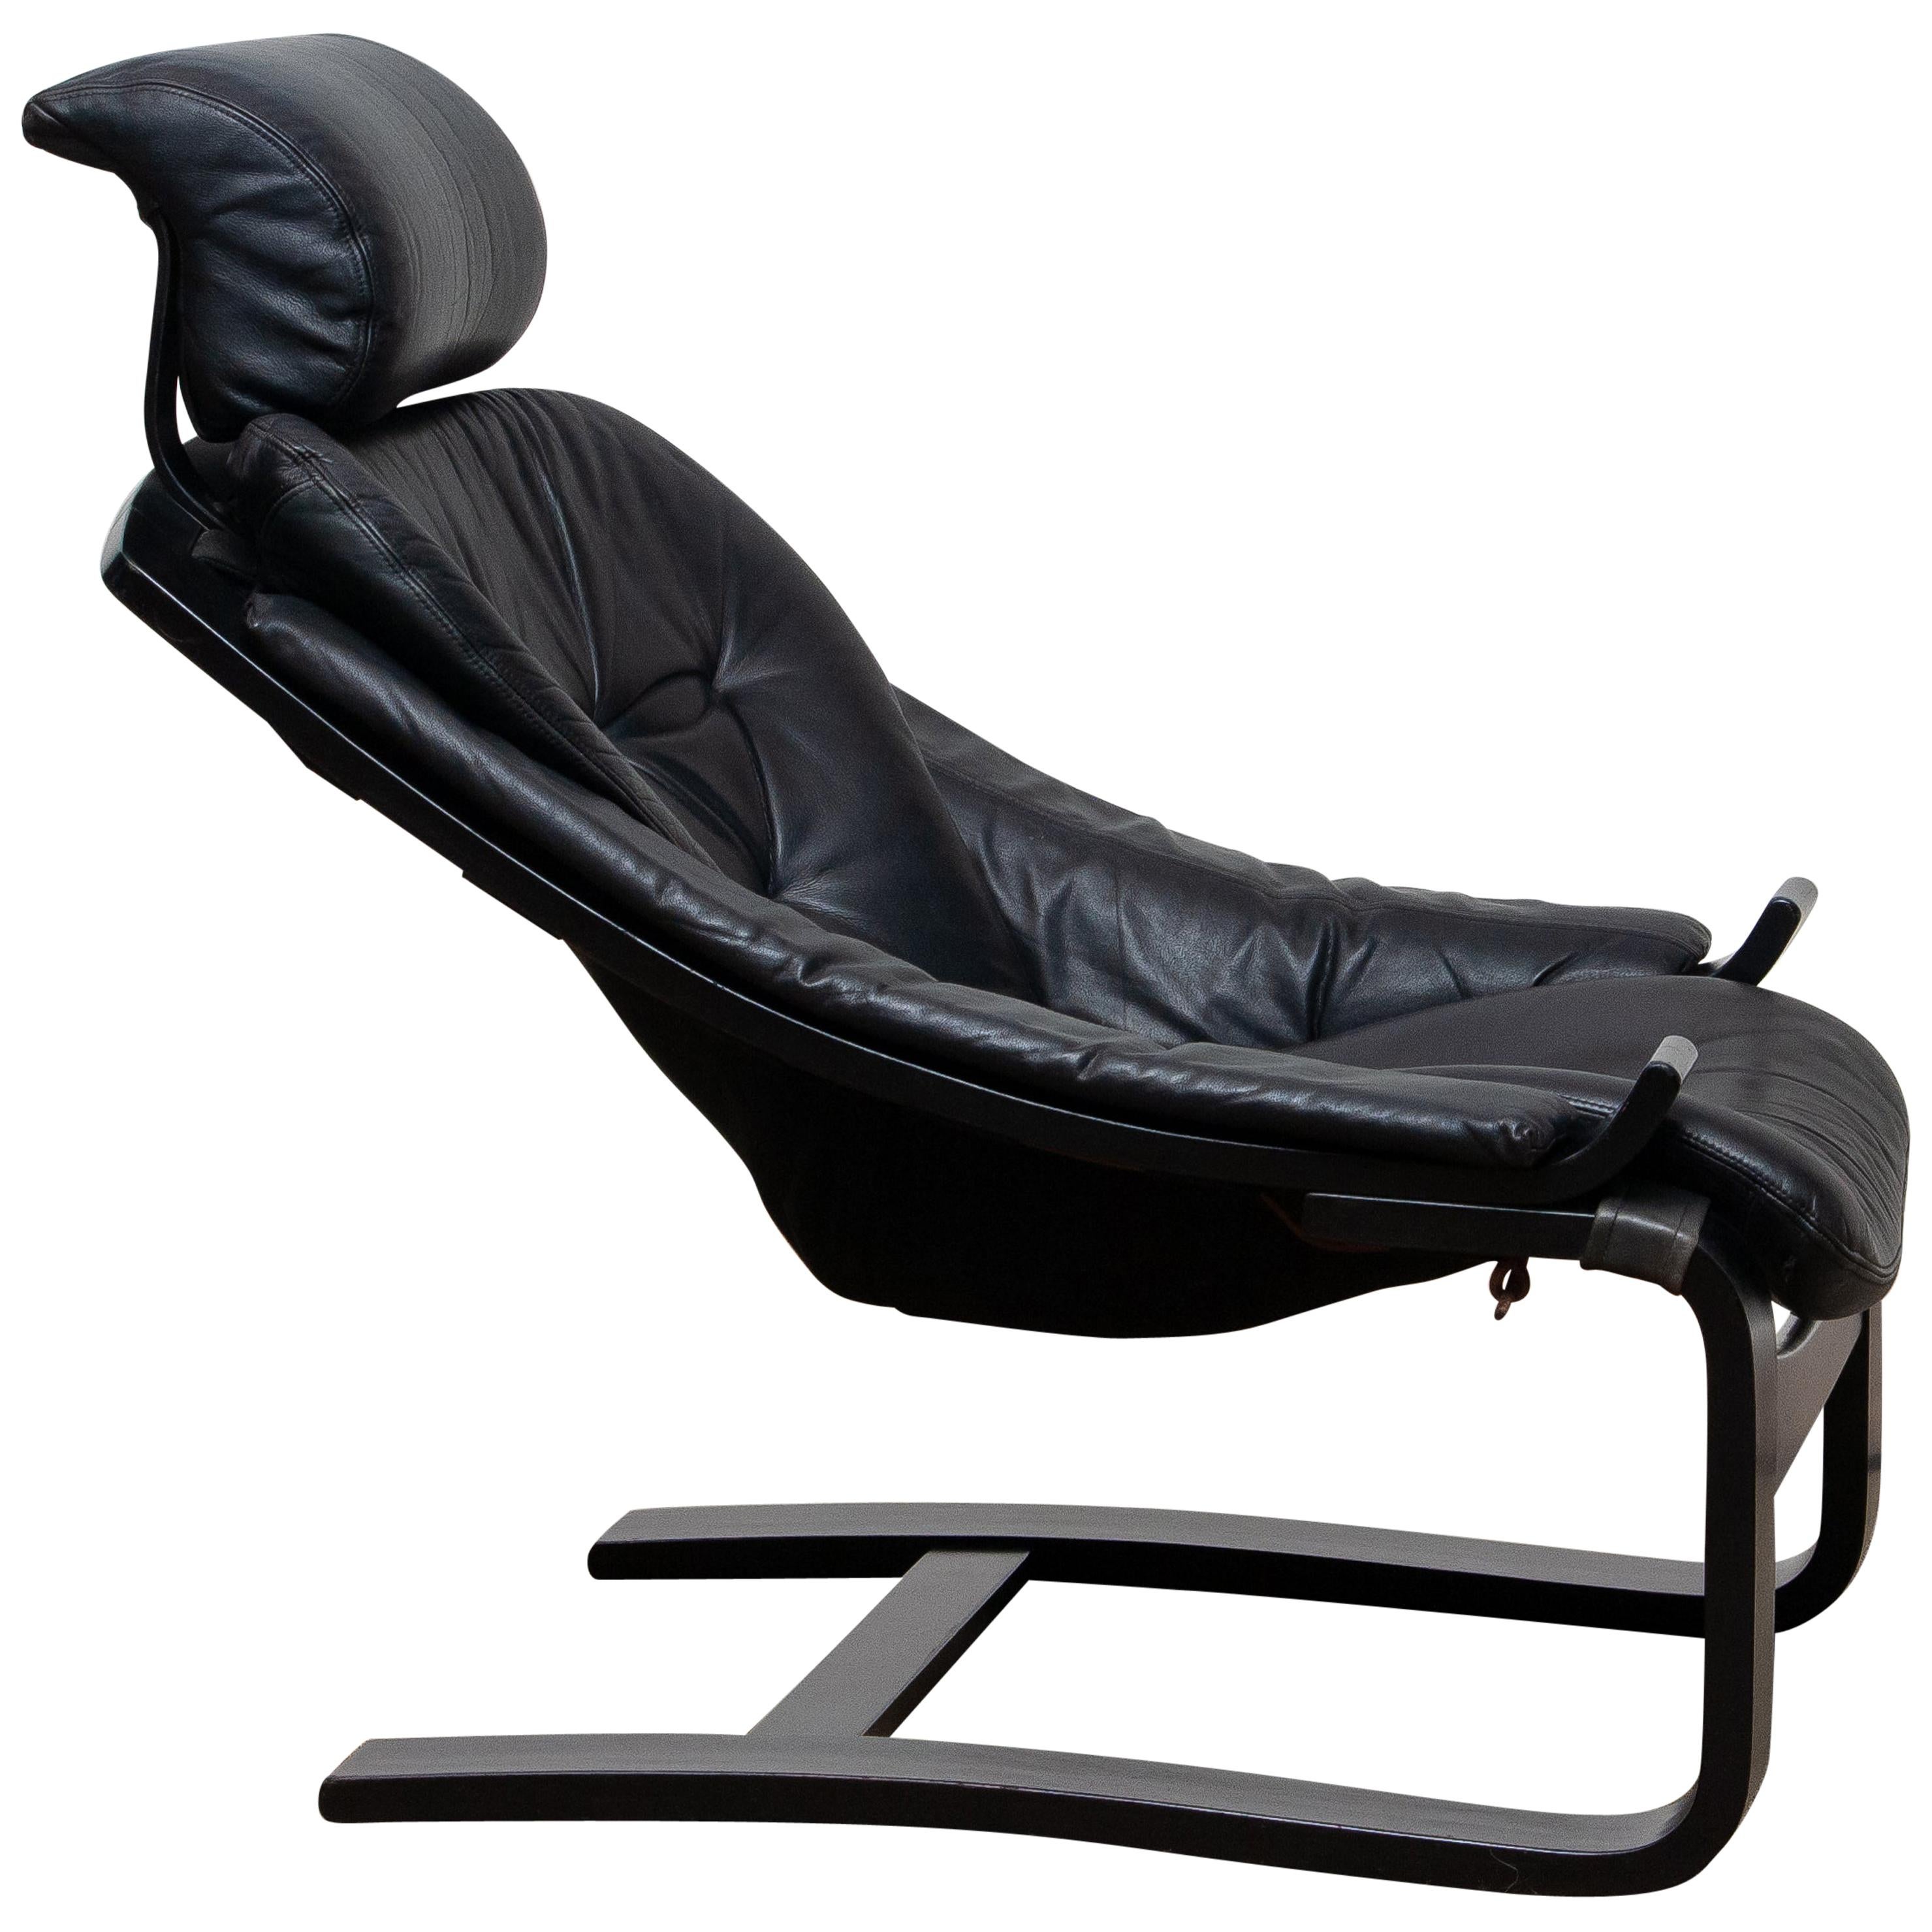 1970s, Black 'Kroken' Lounge Chair by Ake Fribytter for Nelo Sweden in Leather